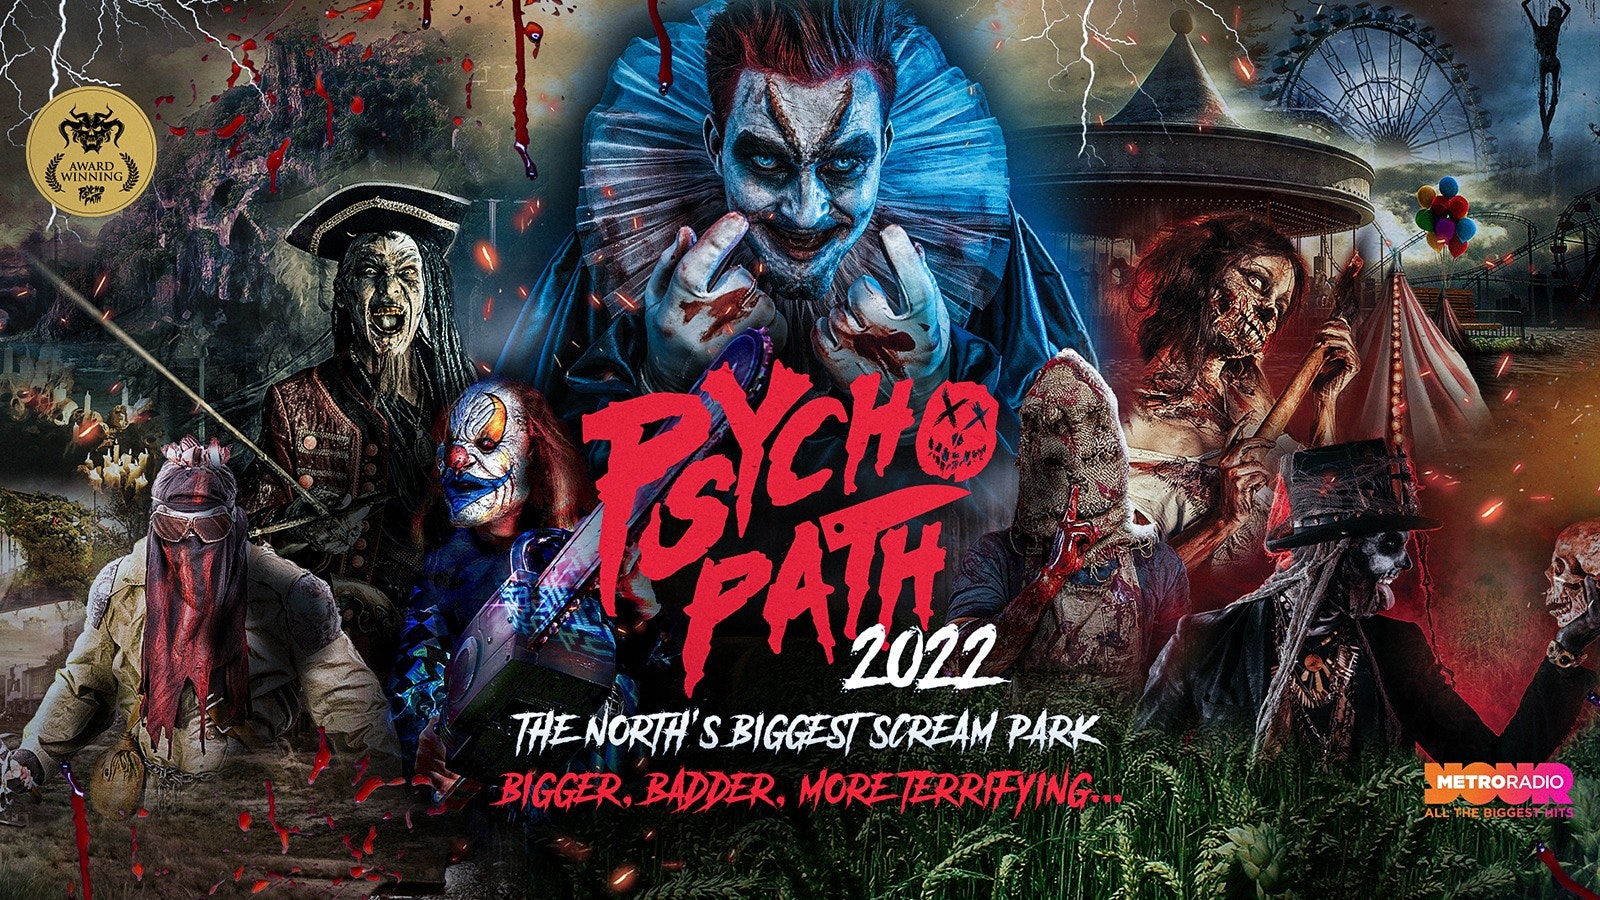 Psycho Path Presents FearGround – Oct 22nd